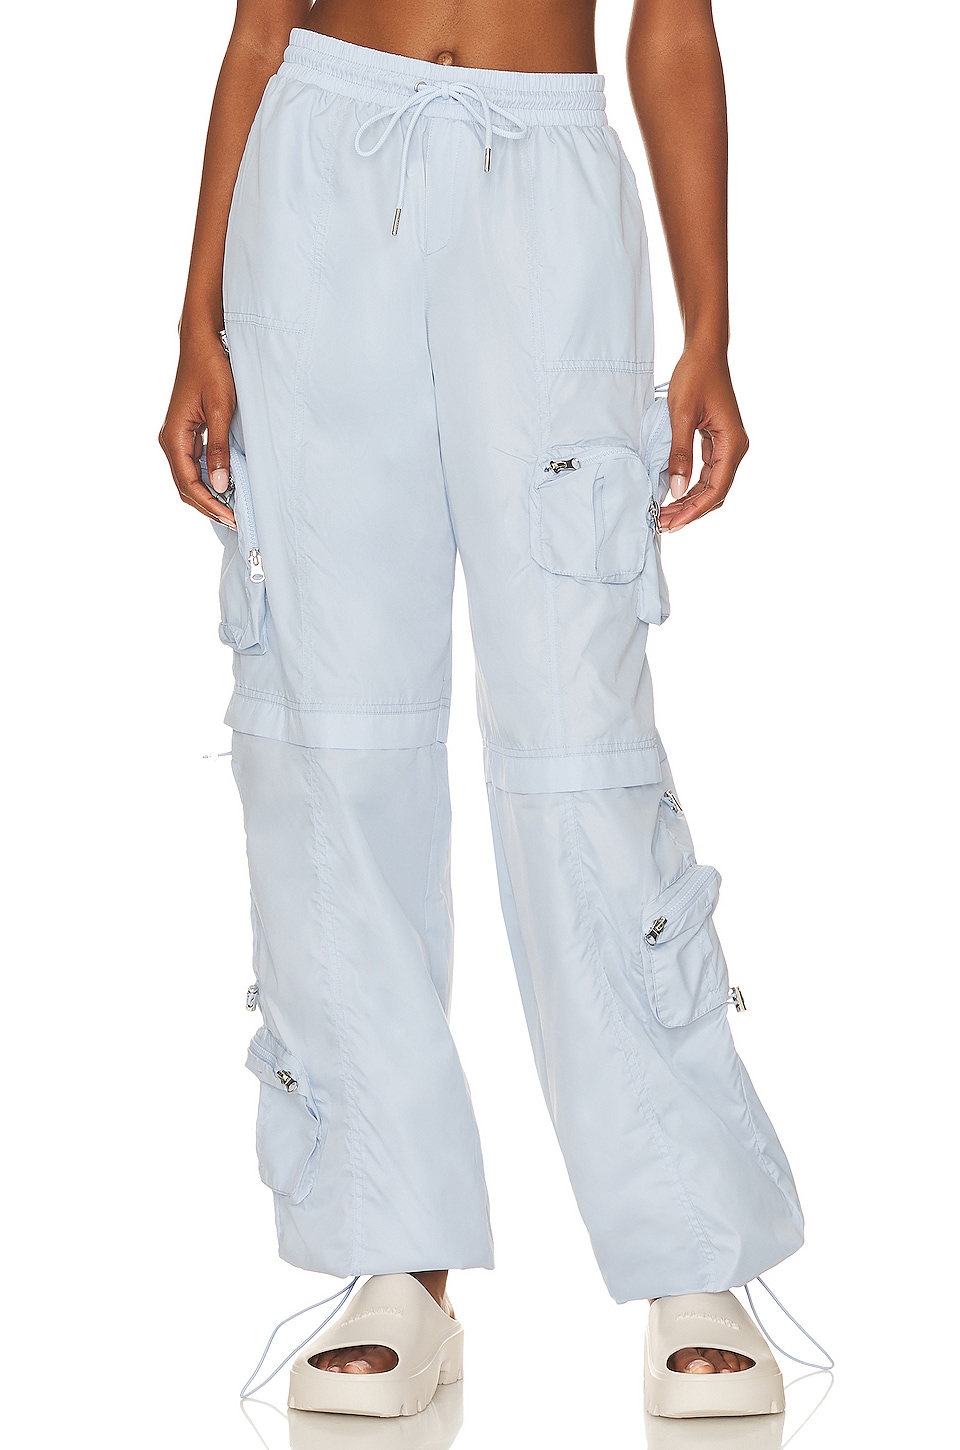 Buy Cargo twill pants - Asley Blue - from KnowledgeCotton Apparel®